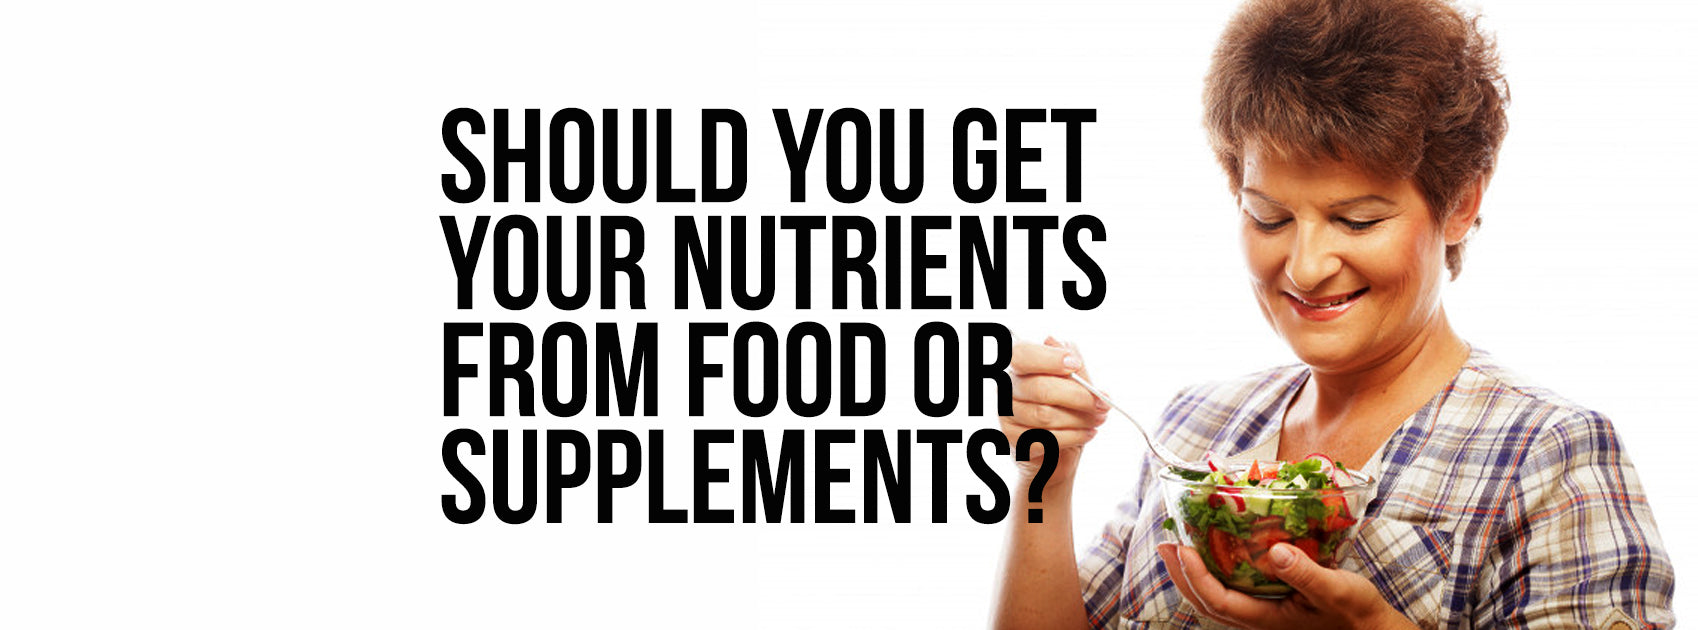 SHOULD YOU GET YOUR NUTRIENTS FROM FOOD OR SUPPLEMENTS?